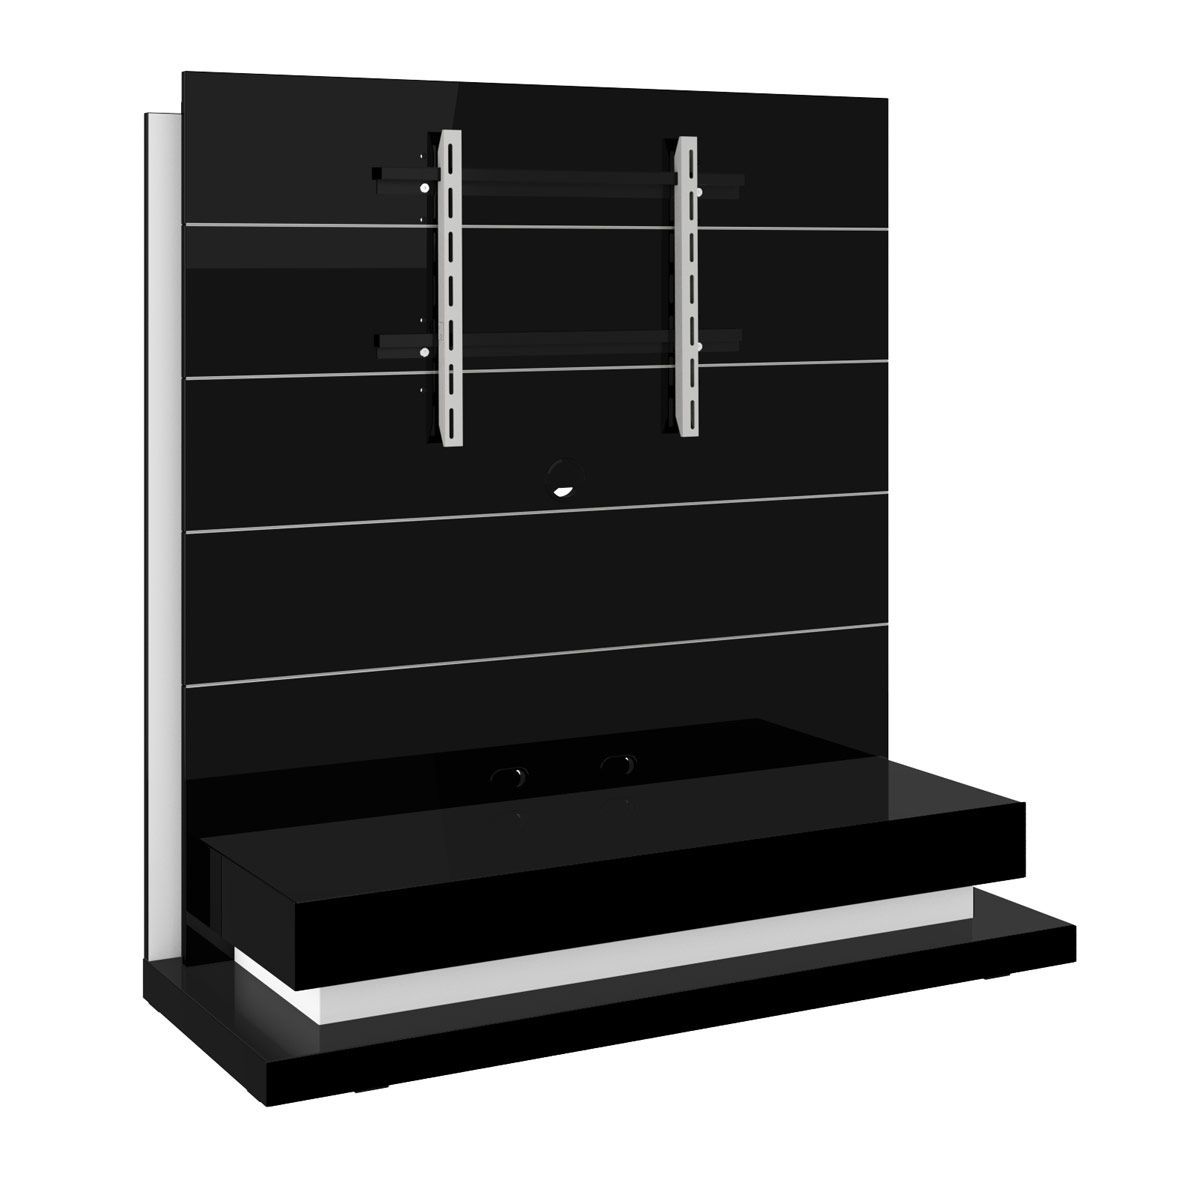 Freestanding Tv Stands Inside Latest Free Standing Lcd Tv Mount With Contemporary Freestanding Units Plus (View 7 of 20)